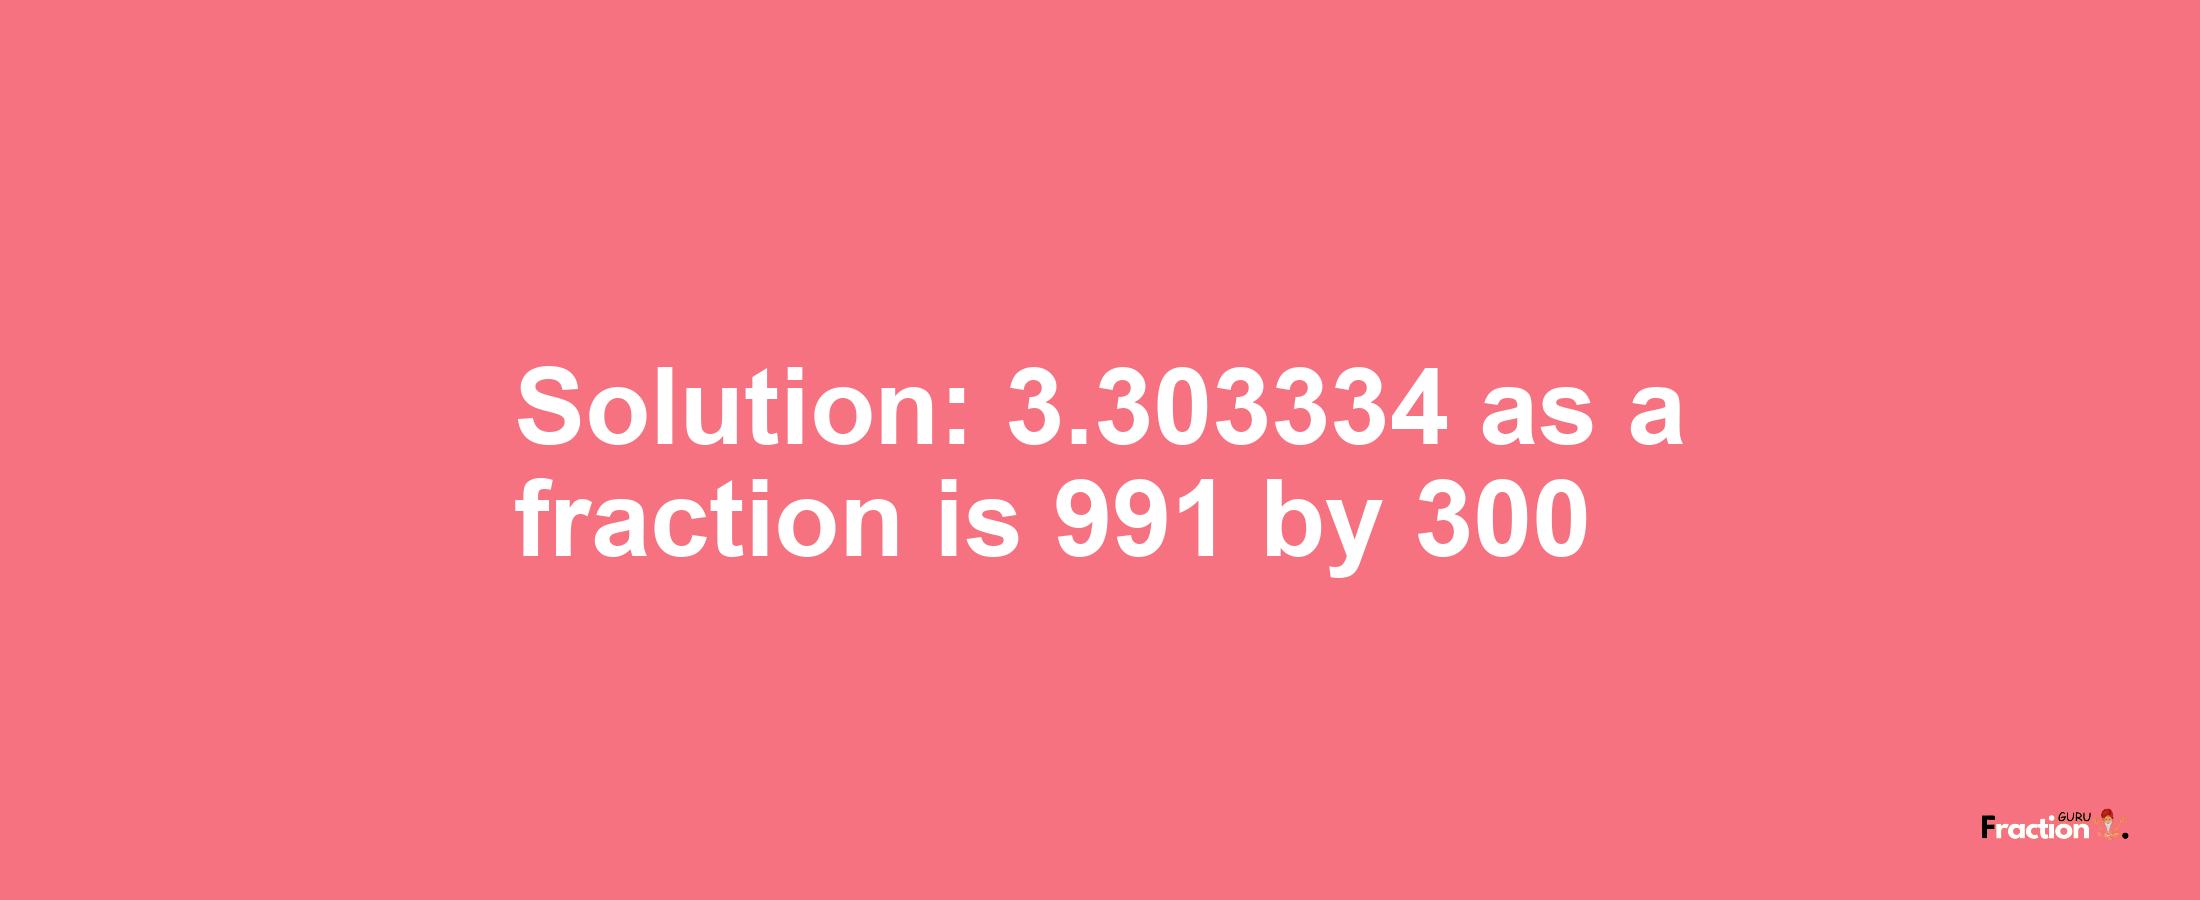 Solution:3.303334 as a fraction is 991/300